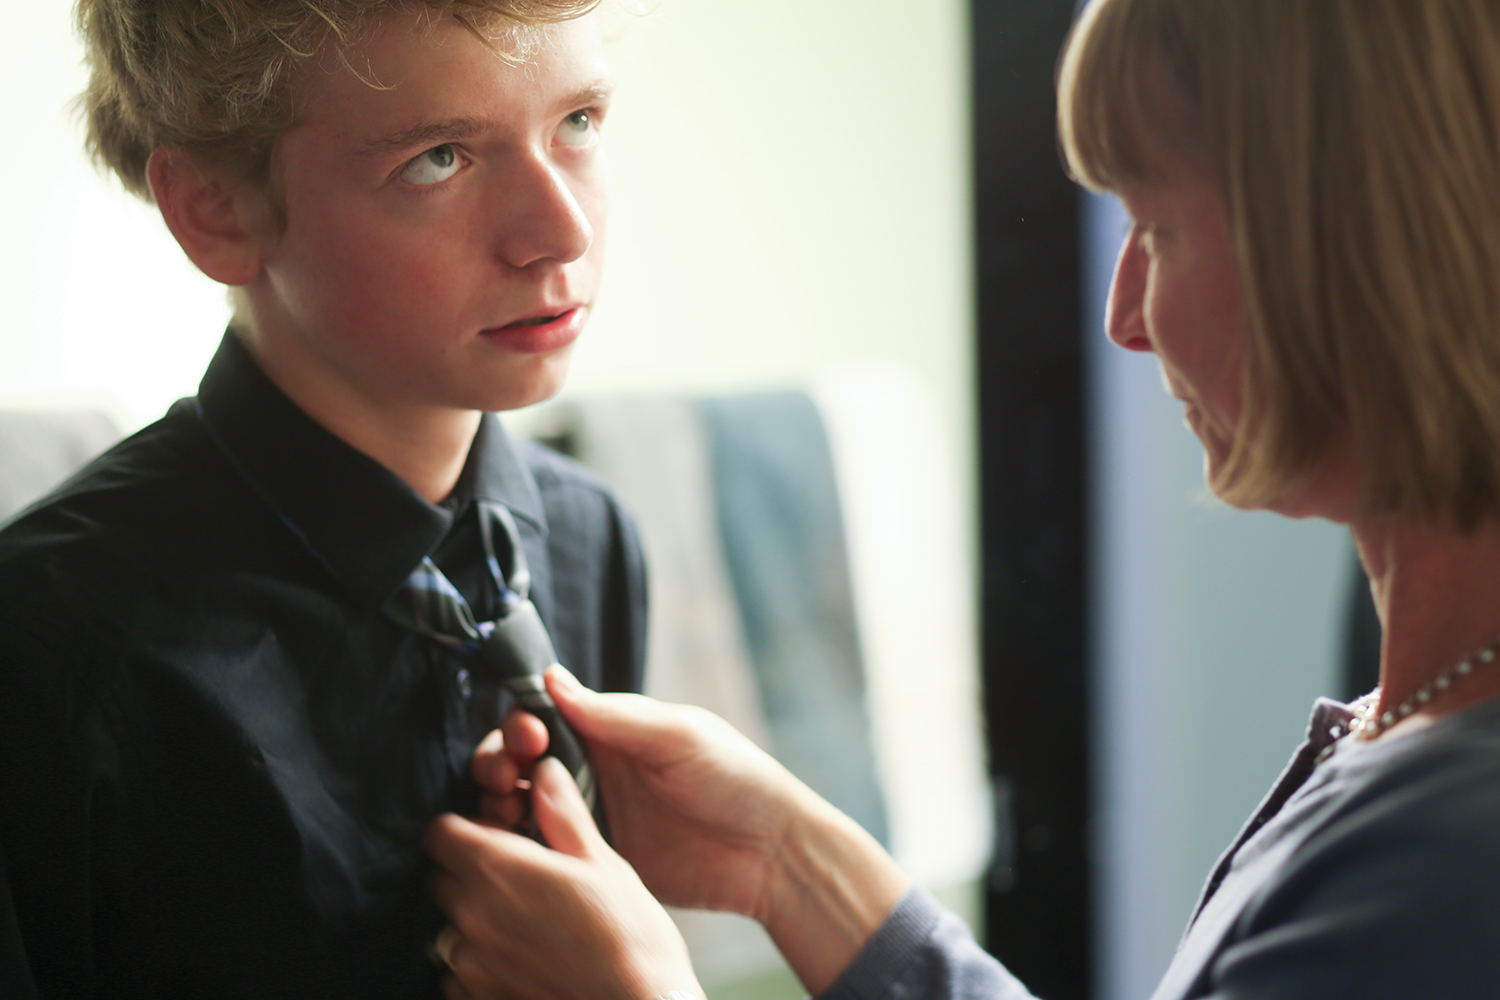 Young man rolling his eyes as his mother fixes his tie.